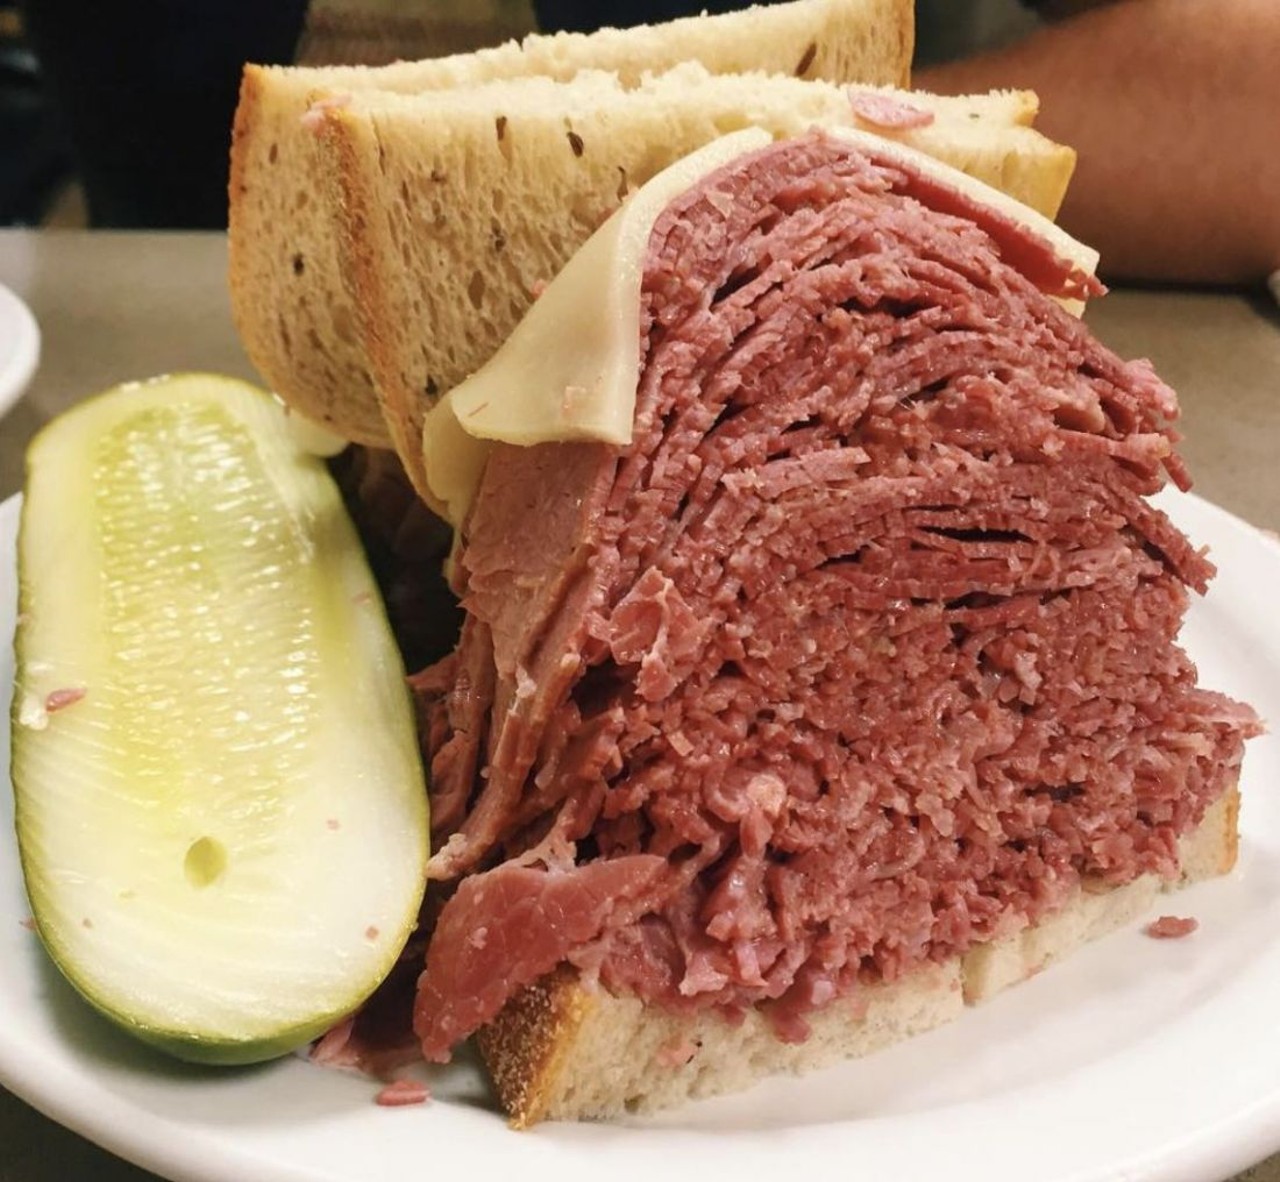  Corned Beef From Slyman&#146;s
3106 St. Clair Ave., Cleveland
16 tons and what do you get? The best corned beef sandmuwich without going into debt. They still slice every sandwich to order, and every sandwich still towers above much of the competition. Amaze your friends by ordering in Slymaneze: a &#147;natural&#148; means plain; &#147;original&#148; comes with mustard; and &#147;Smurf&#148; buys you one with Swiss and mustard (which ain&#146;t kosher, by the way).
Photo via Scene Archives